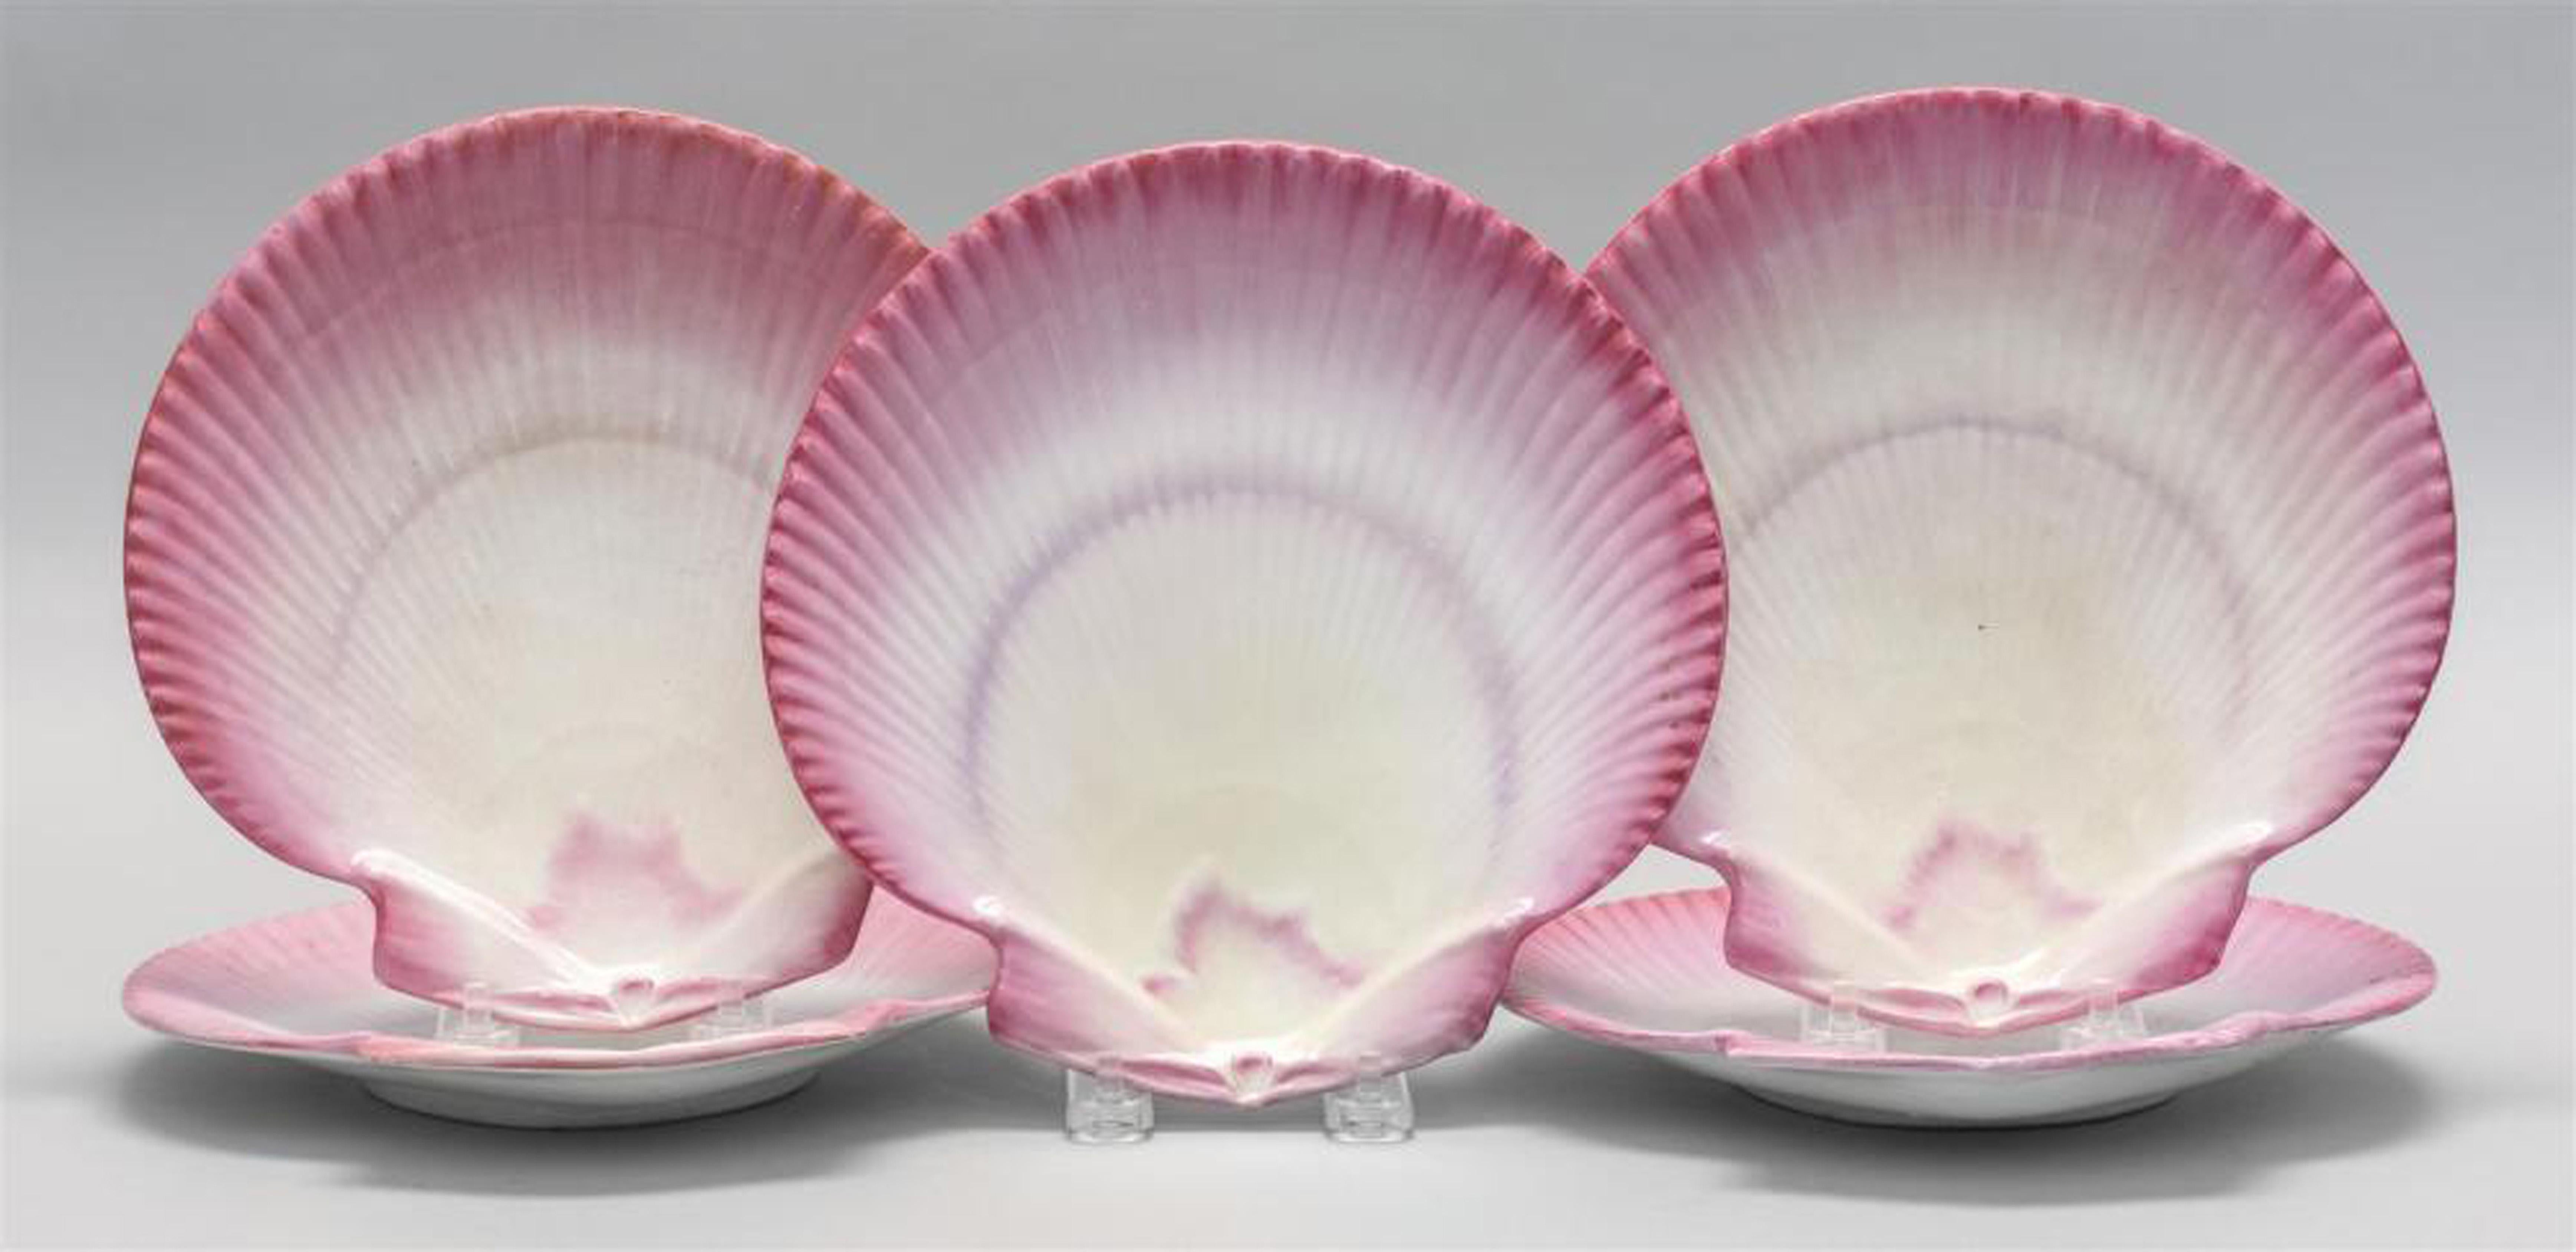 Regency Wedgwood Pottery Pearlware Nautilus Scallop-Shaped Set of Five Shell Plates